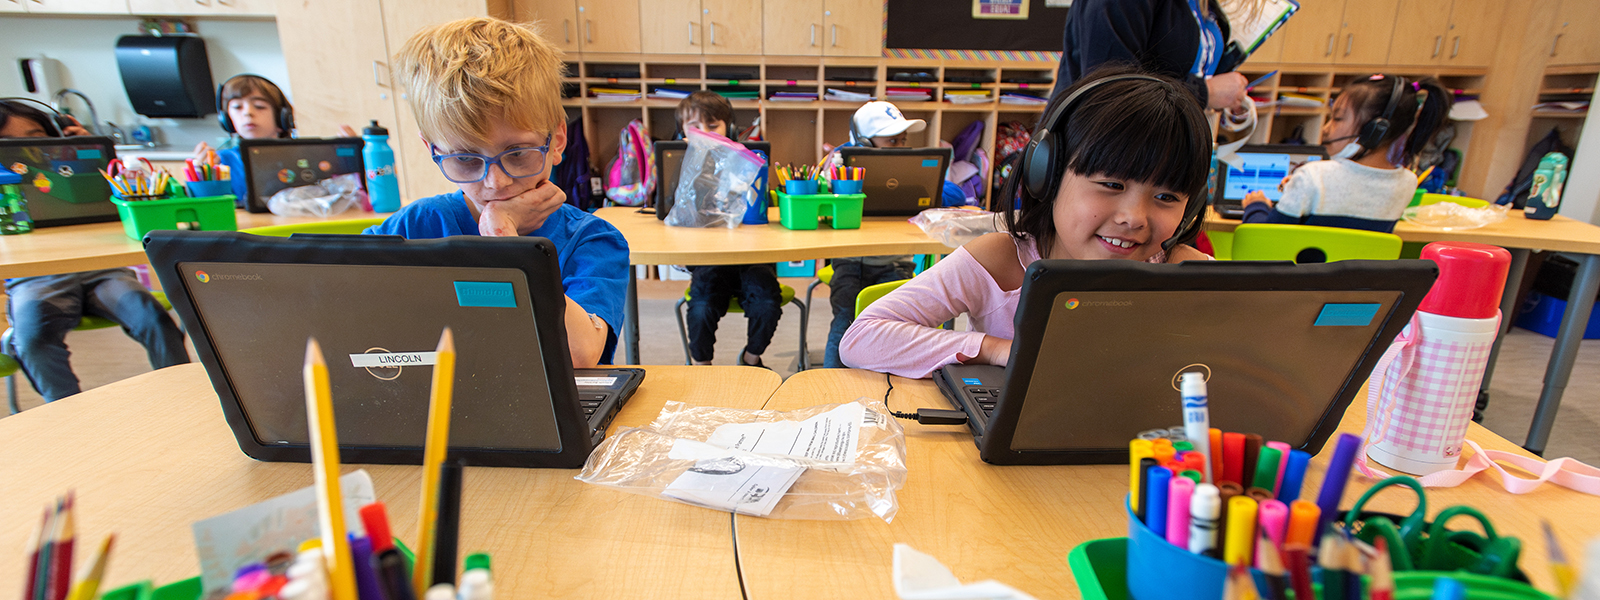 Elementary students work on laptops in a classroom.